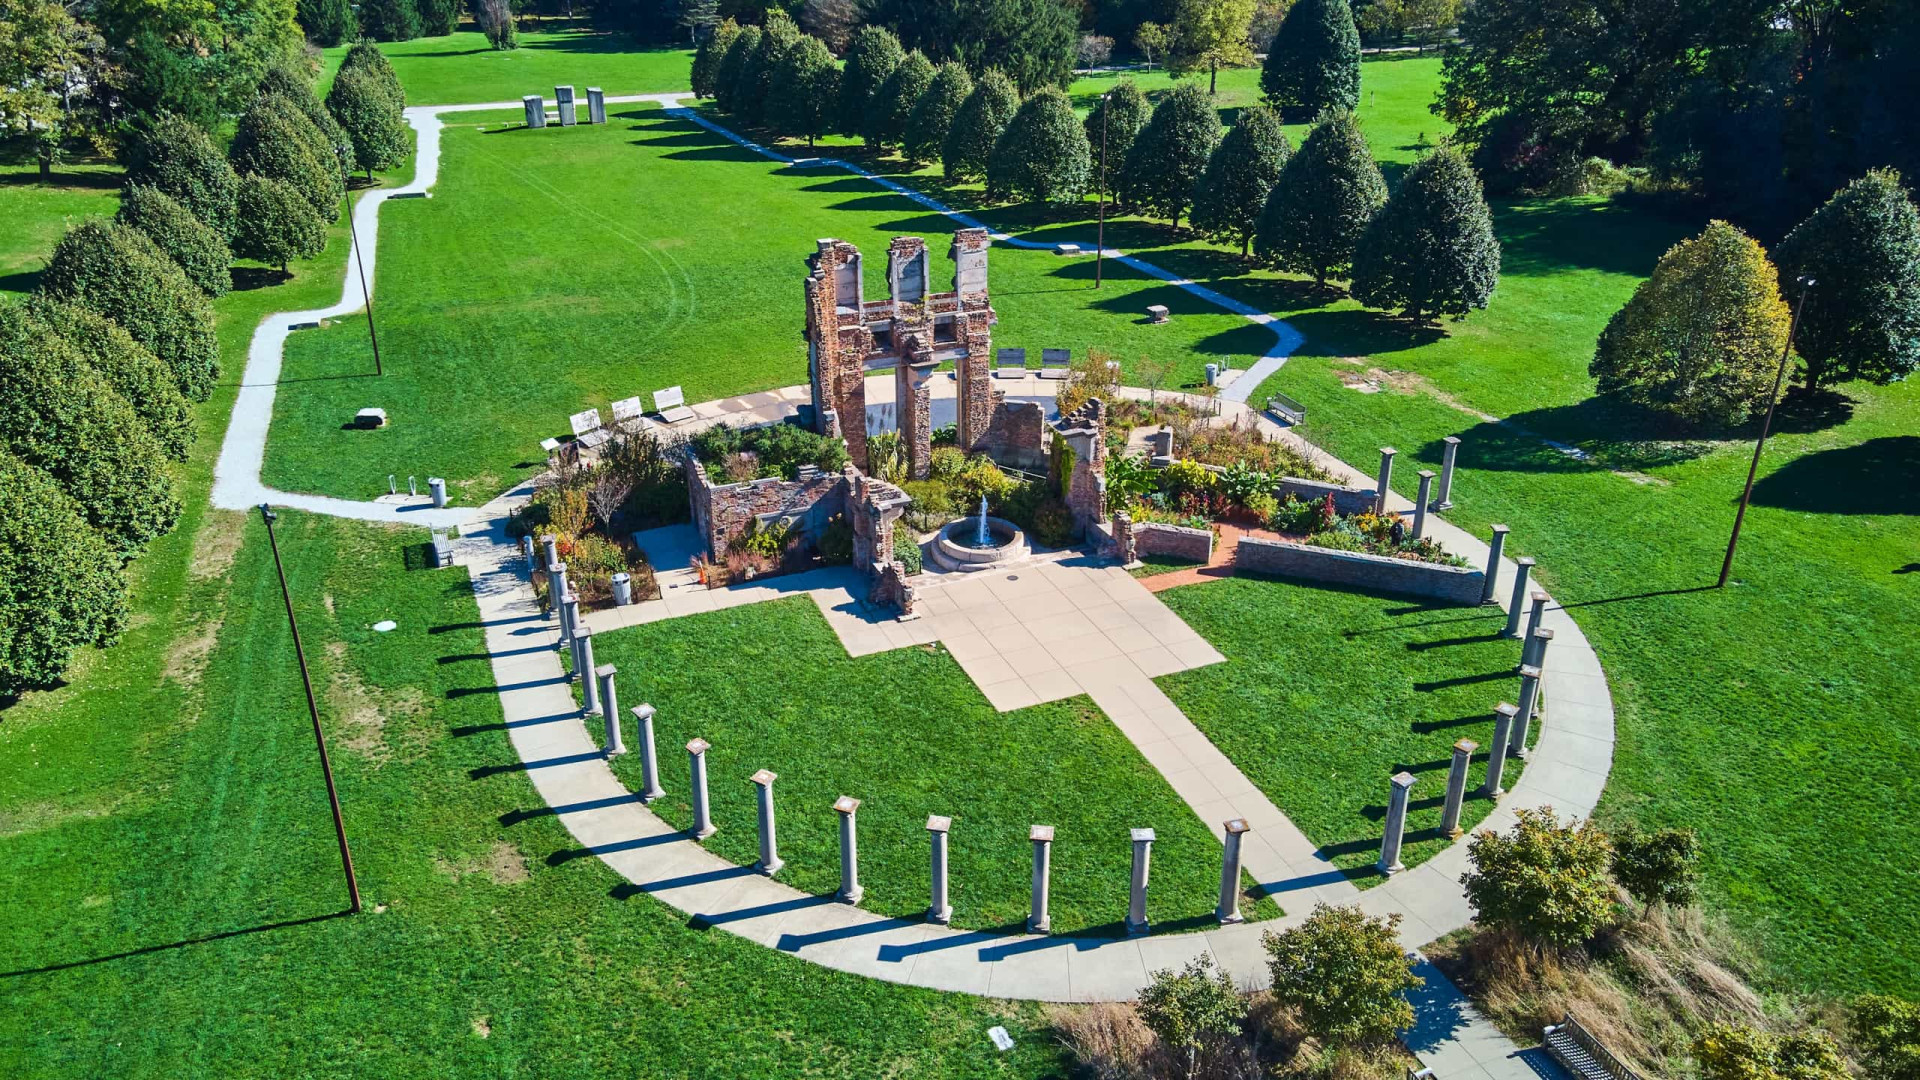 <p>The Ruins, standing in Holliday Park, form the centerpiece of an attractive landscaped garden. The sculptures were salvaged from a New York skyscraper, demolished in the 1950s.</p><p><a href="https://www.msn.com/en-us/community/channel/vid-7xx8mnucu55yw63we9va2gwr7uihbxwc68fxqp25x6tg4ftibpra?cvid=94631541bc0f4f89bfd59158d696ad7e">Follow us and access great exclusive content every day</a></p>